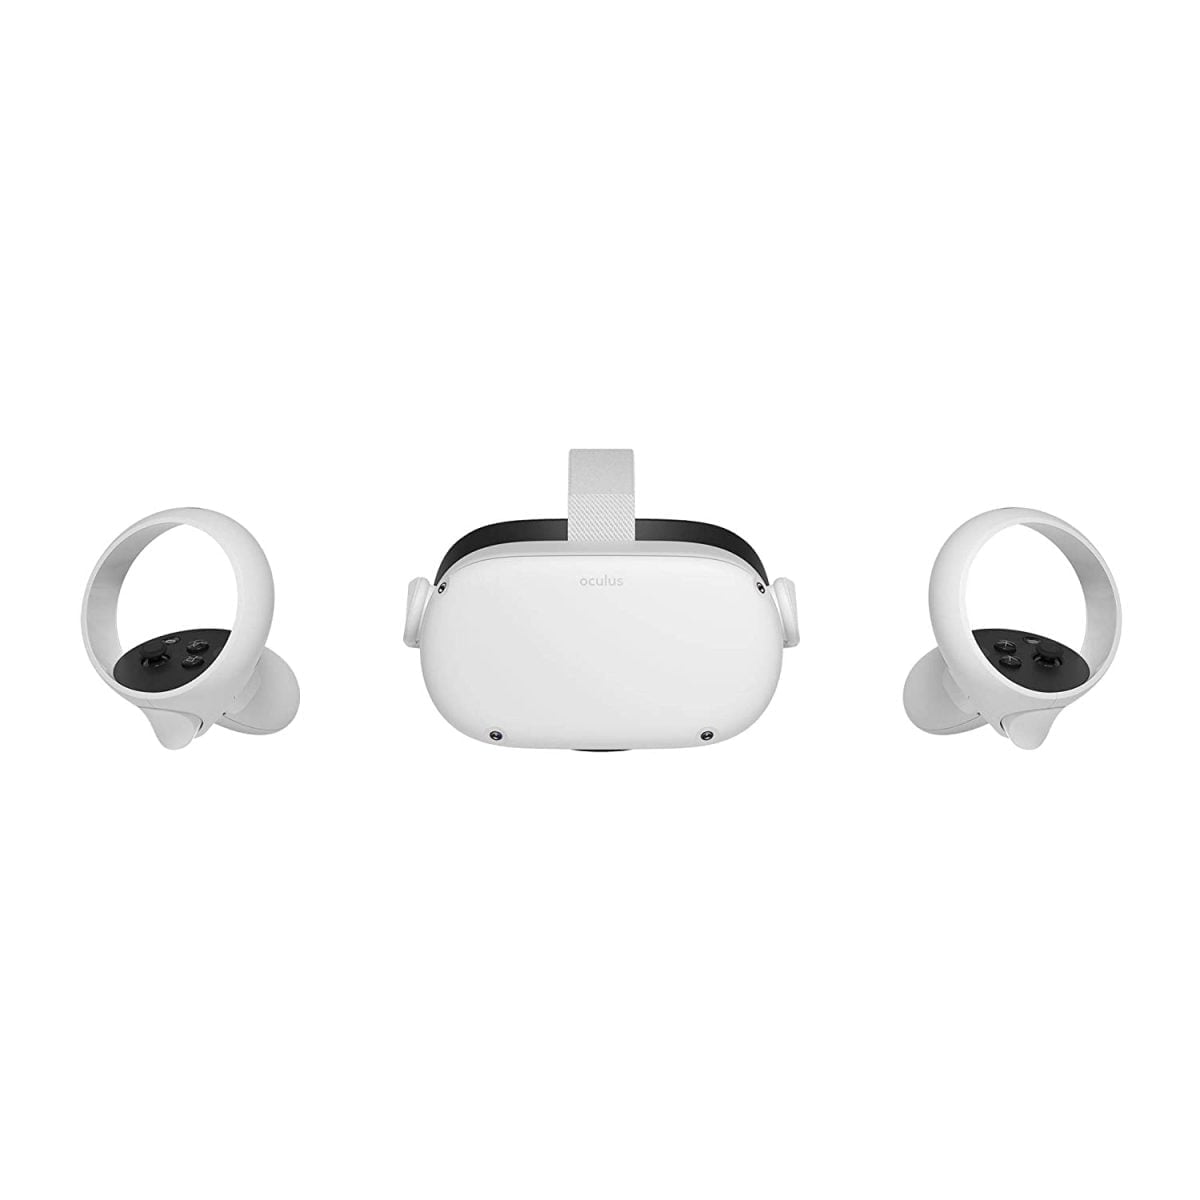 61Nrs7Qqzel. Sl1500 Oculus &Lt;H1&Gt;&Lt;/H1&Gt; &Lt;H1&Gt;Meta Quest 2 128 Gb Virtual Reality Headset Bundle Of 10 (Combo Offer)&Lt;/H1&Gt; Https://Youtu.be/Atvgl9Wojsm &Lt;Ul Class=&Quot;A-Unordered-List A-Vertical A-Spacing-Mini&Quot;&Gt; &Lt;Li&Gt;&Lt;Span Class=&Quot;A-List-Item&Quot;&Gt;Voltage: 100-240 V&Lt;/Span&Gt;&Lt;/Li&Gt; &Lt;Li&Gt;&Lt;Span Class=&Quot;A-List-Item&Quot;&Gt;Next-Level Hardware - Make Every Move Count With A Blazing-Fast Processor And Our Highest-Resolution Display&Lt;/Span&Gt;&Lt;/Li&Gt; &Lt;Li&Gt;&Lt;Span Class=&Quot;A-List-Item&Quot;&Gt;All-In-One Gaming - With Backward Compatibility, You Can Explore New Titles And Old Favorites In The Expansive Quest Content Library&Lt;/Span&Gt;&Lt;/Li&Gt; &Lt;Li&Gt;&Lt;Span Class=&Quot;A-List-Item&Quot;&Gt;Immersive Entertainment - Get The Best Seat In The House To Live Concerts, Groundbreaking Films, Exclusive Events And More&Lt;/Span&Gt;&Lt;/Li&Gt; &Lt;Li&Gt;&Lt;Span Class=&Quot;A-List-Item&Quot;&Gt;Easy Setup - Just Open The Box, Set Up With The Smartphone App And Jump Into Vr. No Pc Or Console Needed. Requires Wireless Internet Access And The Oculus App (Free Download) To Set Up Device Premium Display - Catch Every Detail With A Stunning Display That Features 50% More Pixels Than The Original Quest Ultimate Control - Redesigned Oculus Touch Controllers Transport Your Movements Directly Into Vr With Intuitive Controls Pc Vr Compatible - Step Into Incredible Oculus Rift Titles By Connecting An Oculus Link Cable To A Compatible Gaming Pc. Oculus Link Cable Sold Separately 3D Cinematic Sound - Hear In All Directions With Built-In Speakers That Deliver Cinematic 3D Positional Audio&Lt;/Span&Gt;&Lt;/Li&Gt; &Lt;/Ul&Gt; &Nbsp; Meta Quest 2 Meta Quest 2 128 Gb Virtual Reality Headset Bundle Of 10 (Combo Offer)